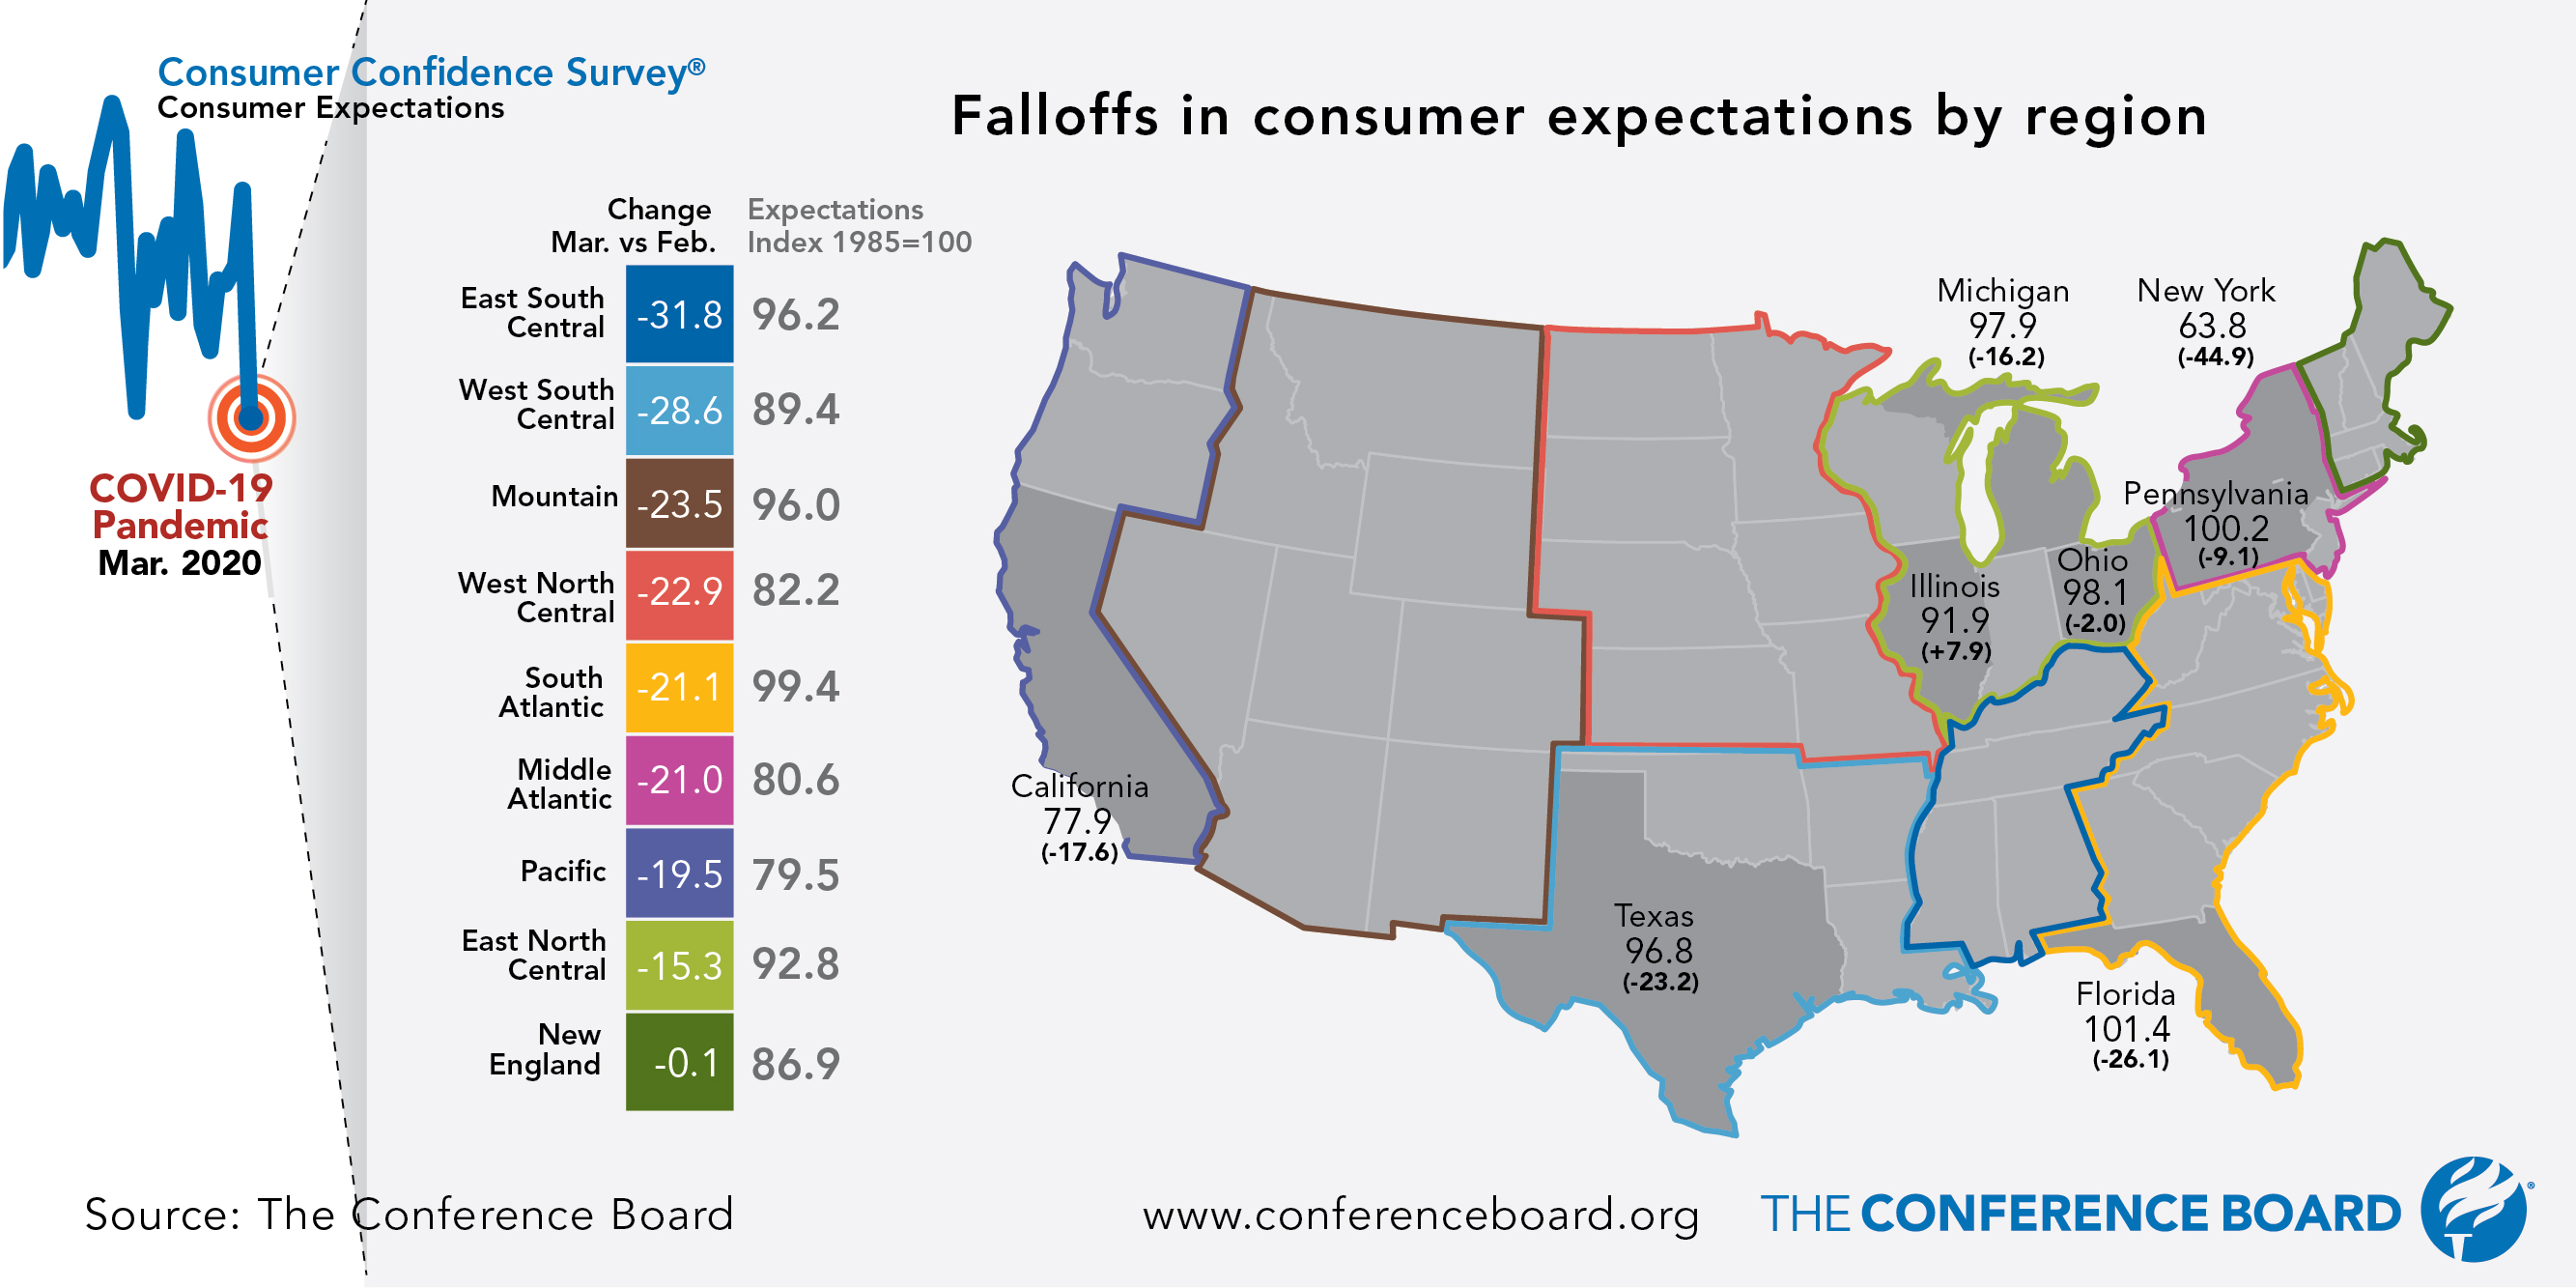 Impact of COVID-19 on consumer expectations varies by US Region, but pessimism spreading fast